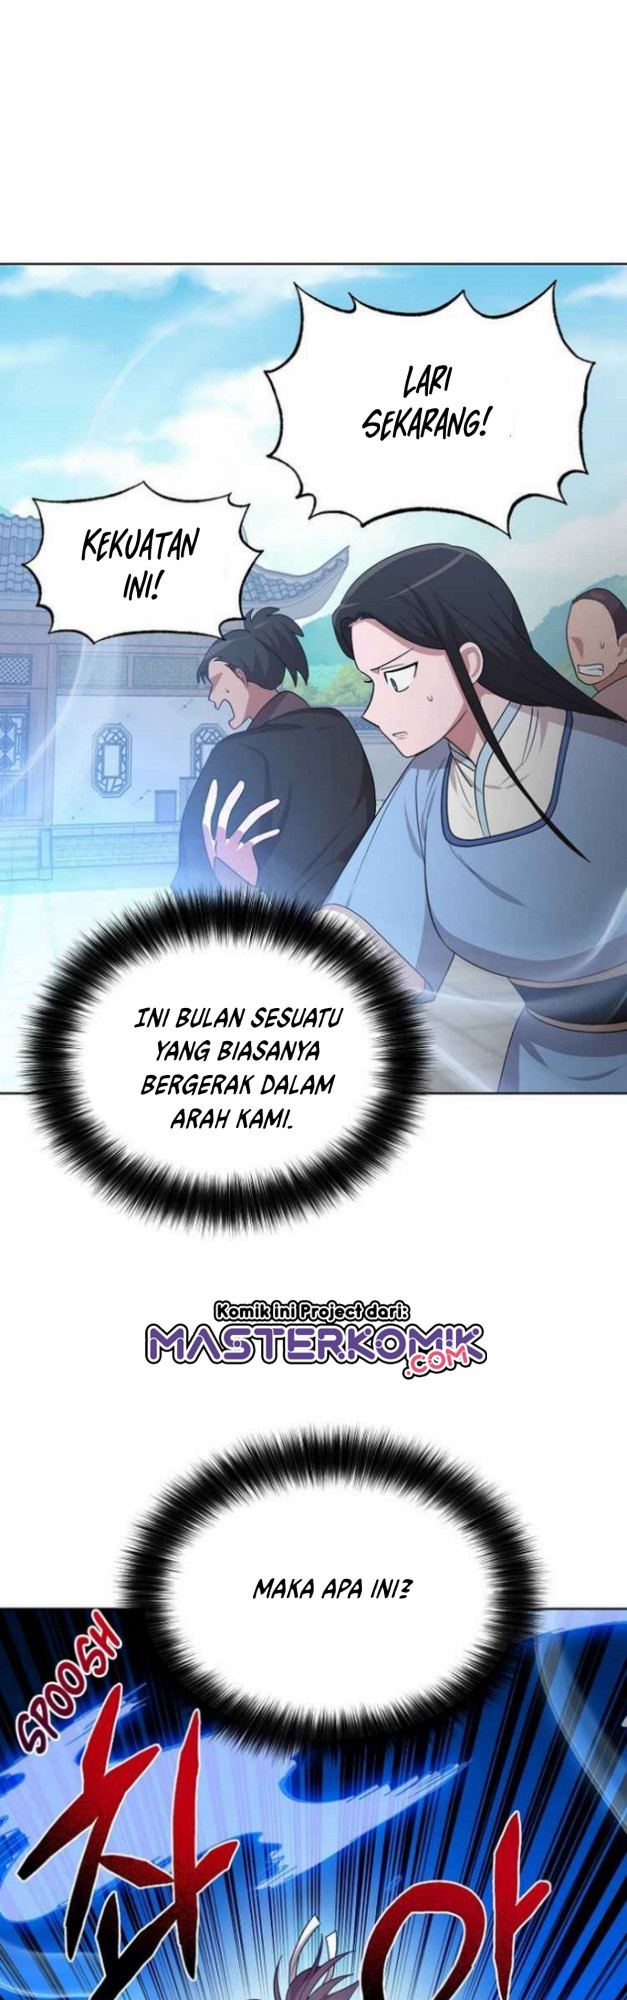 Fire King Dragon Chapter 40